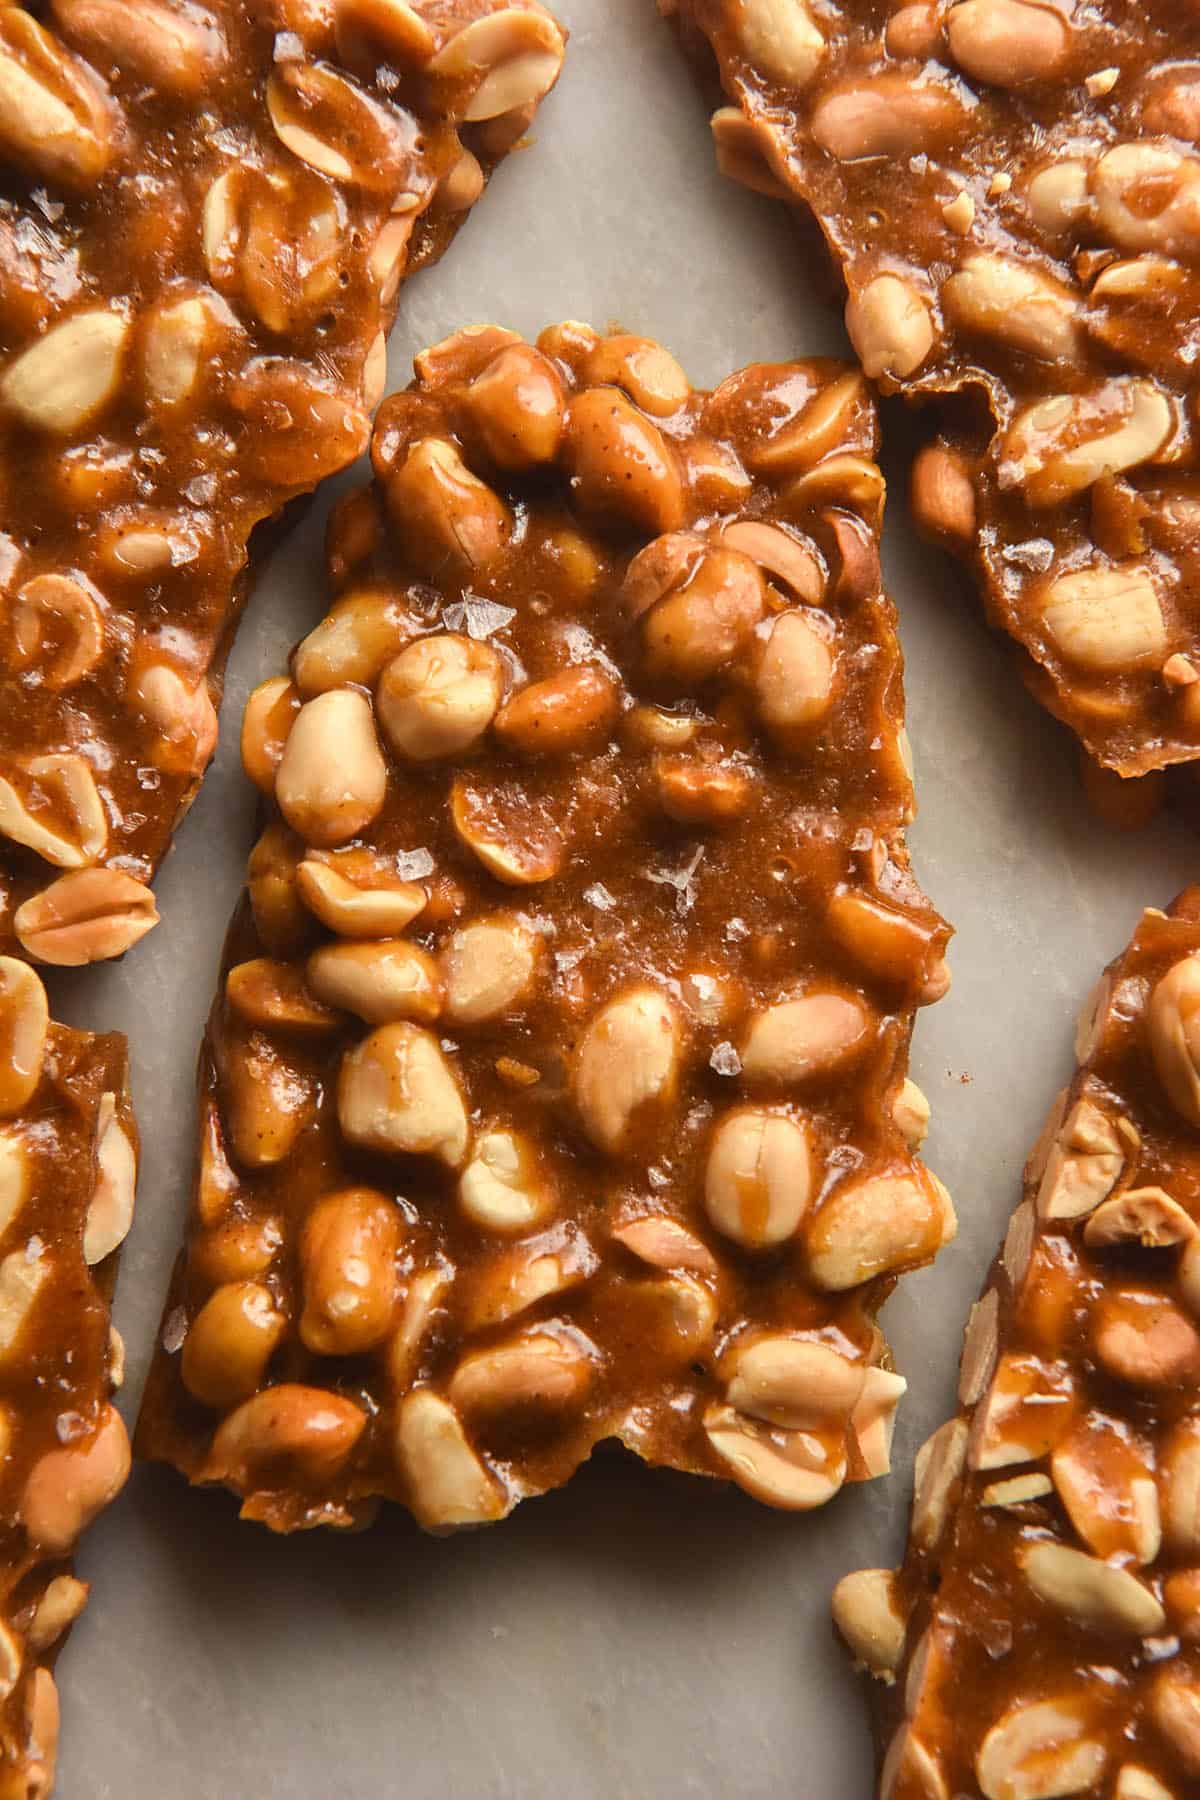 A close up aerial image of slabs of snapped peanut brittle without corn syrup arranged on a white marble table. The centre slab is sprinkled with flaky sea salt